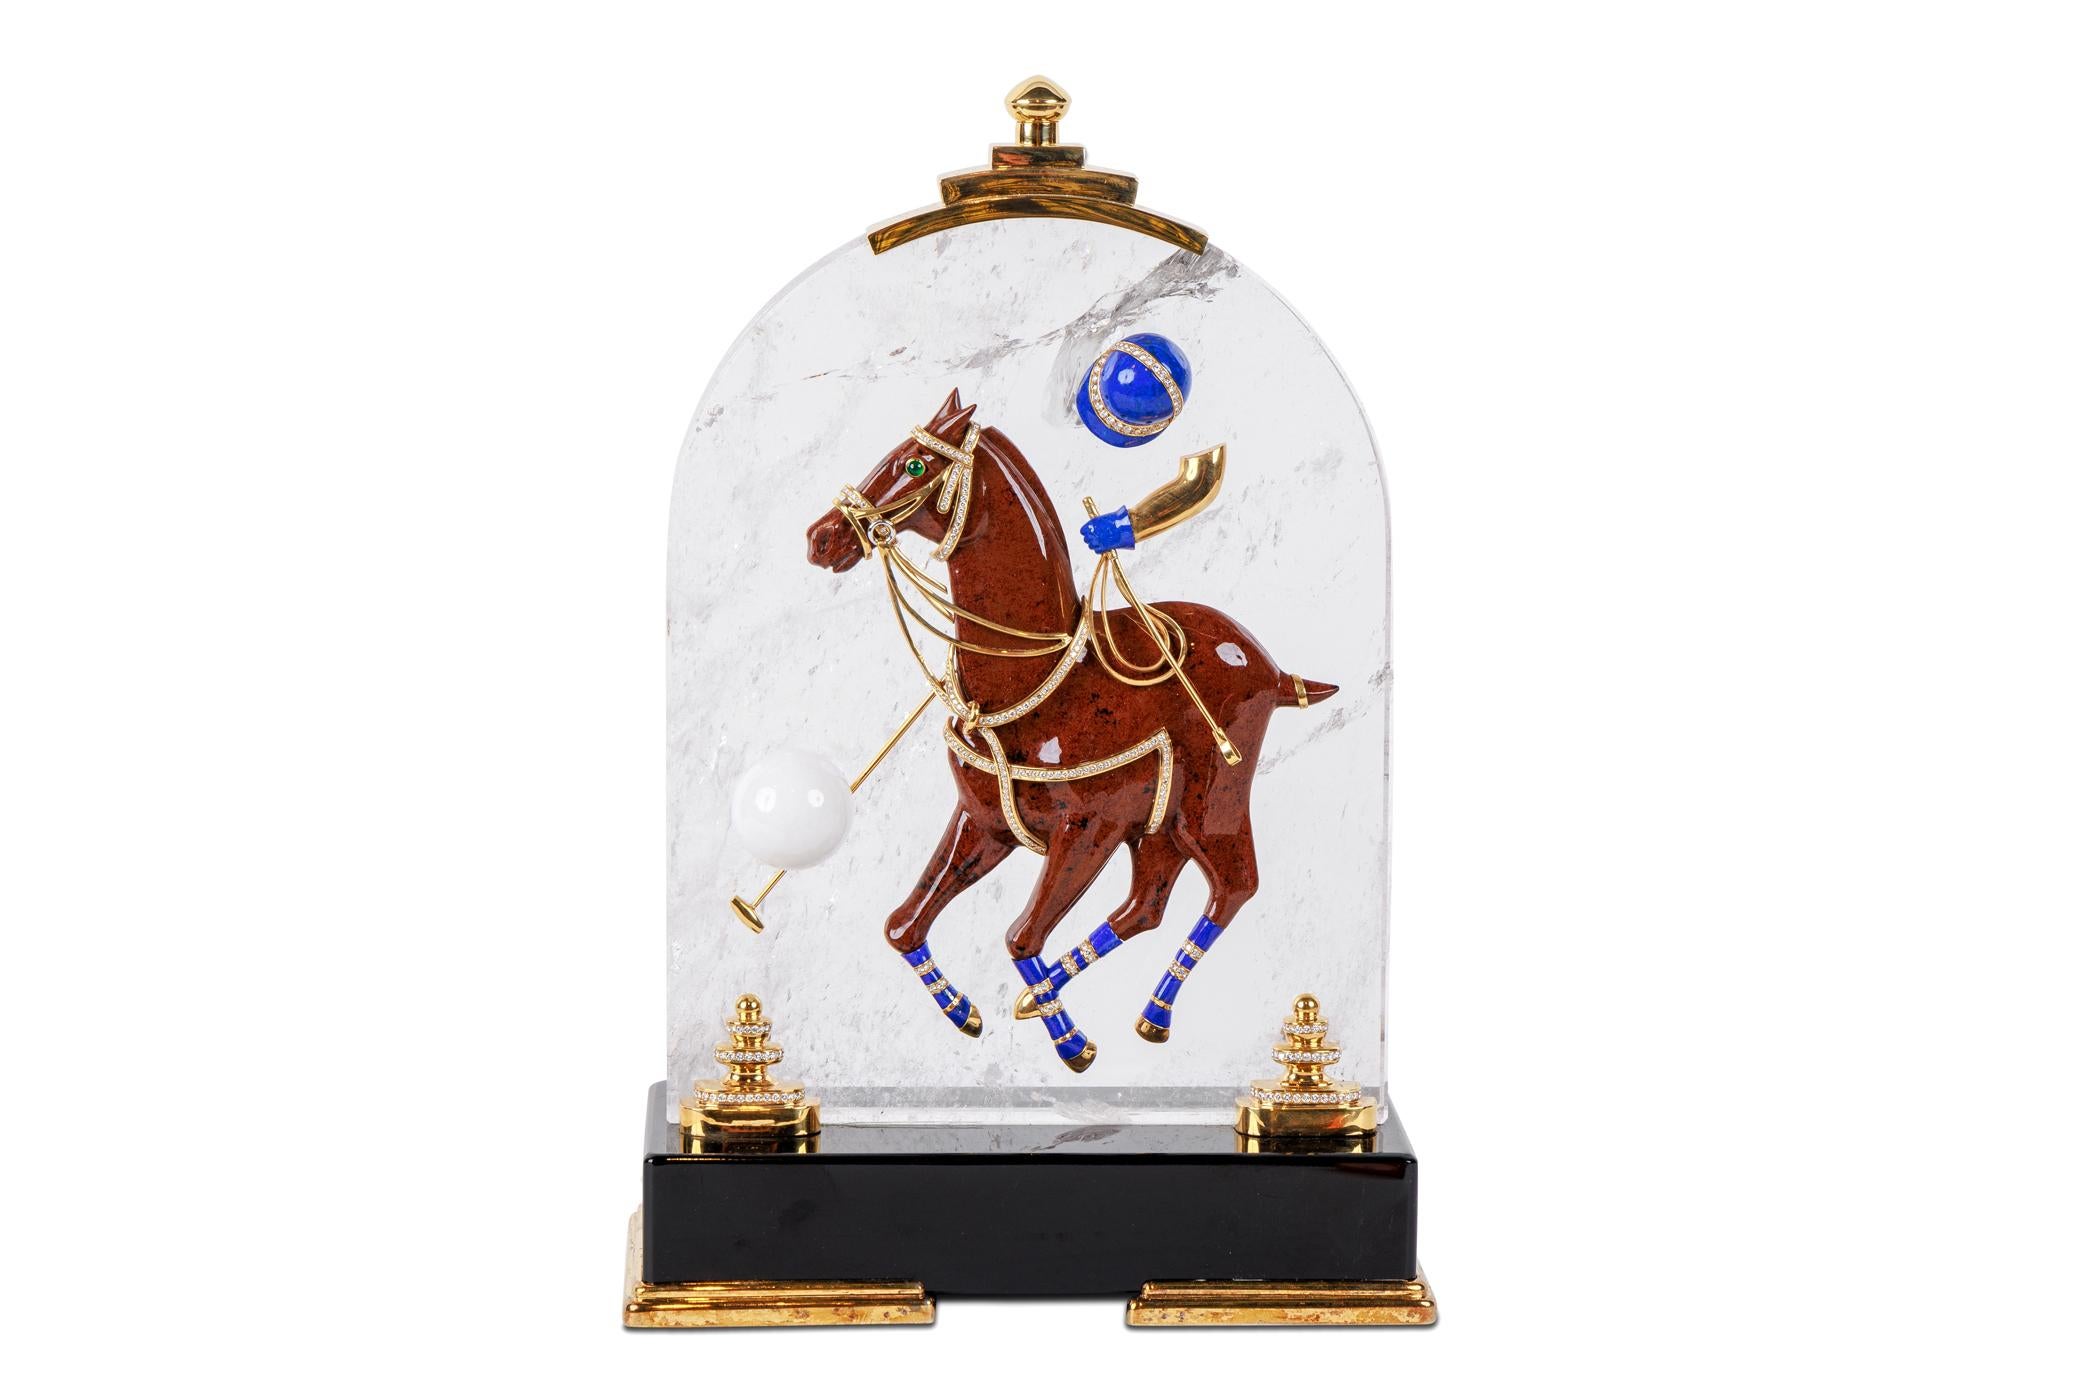 Mellerio Paris, A French Gold, Diamonds, Silver-Gilt, Rock Crystal, Enamel, Emerald, Lapis Lazuli, Agate, Emerald, and Obsidian Polo Player, Carved Horse Sculpture, Jeweled Mounted Object.

An extremely rare and unique, one of a kind French Carved